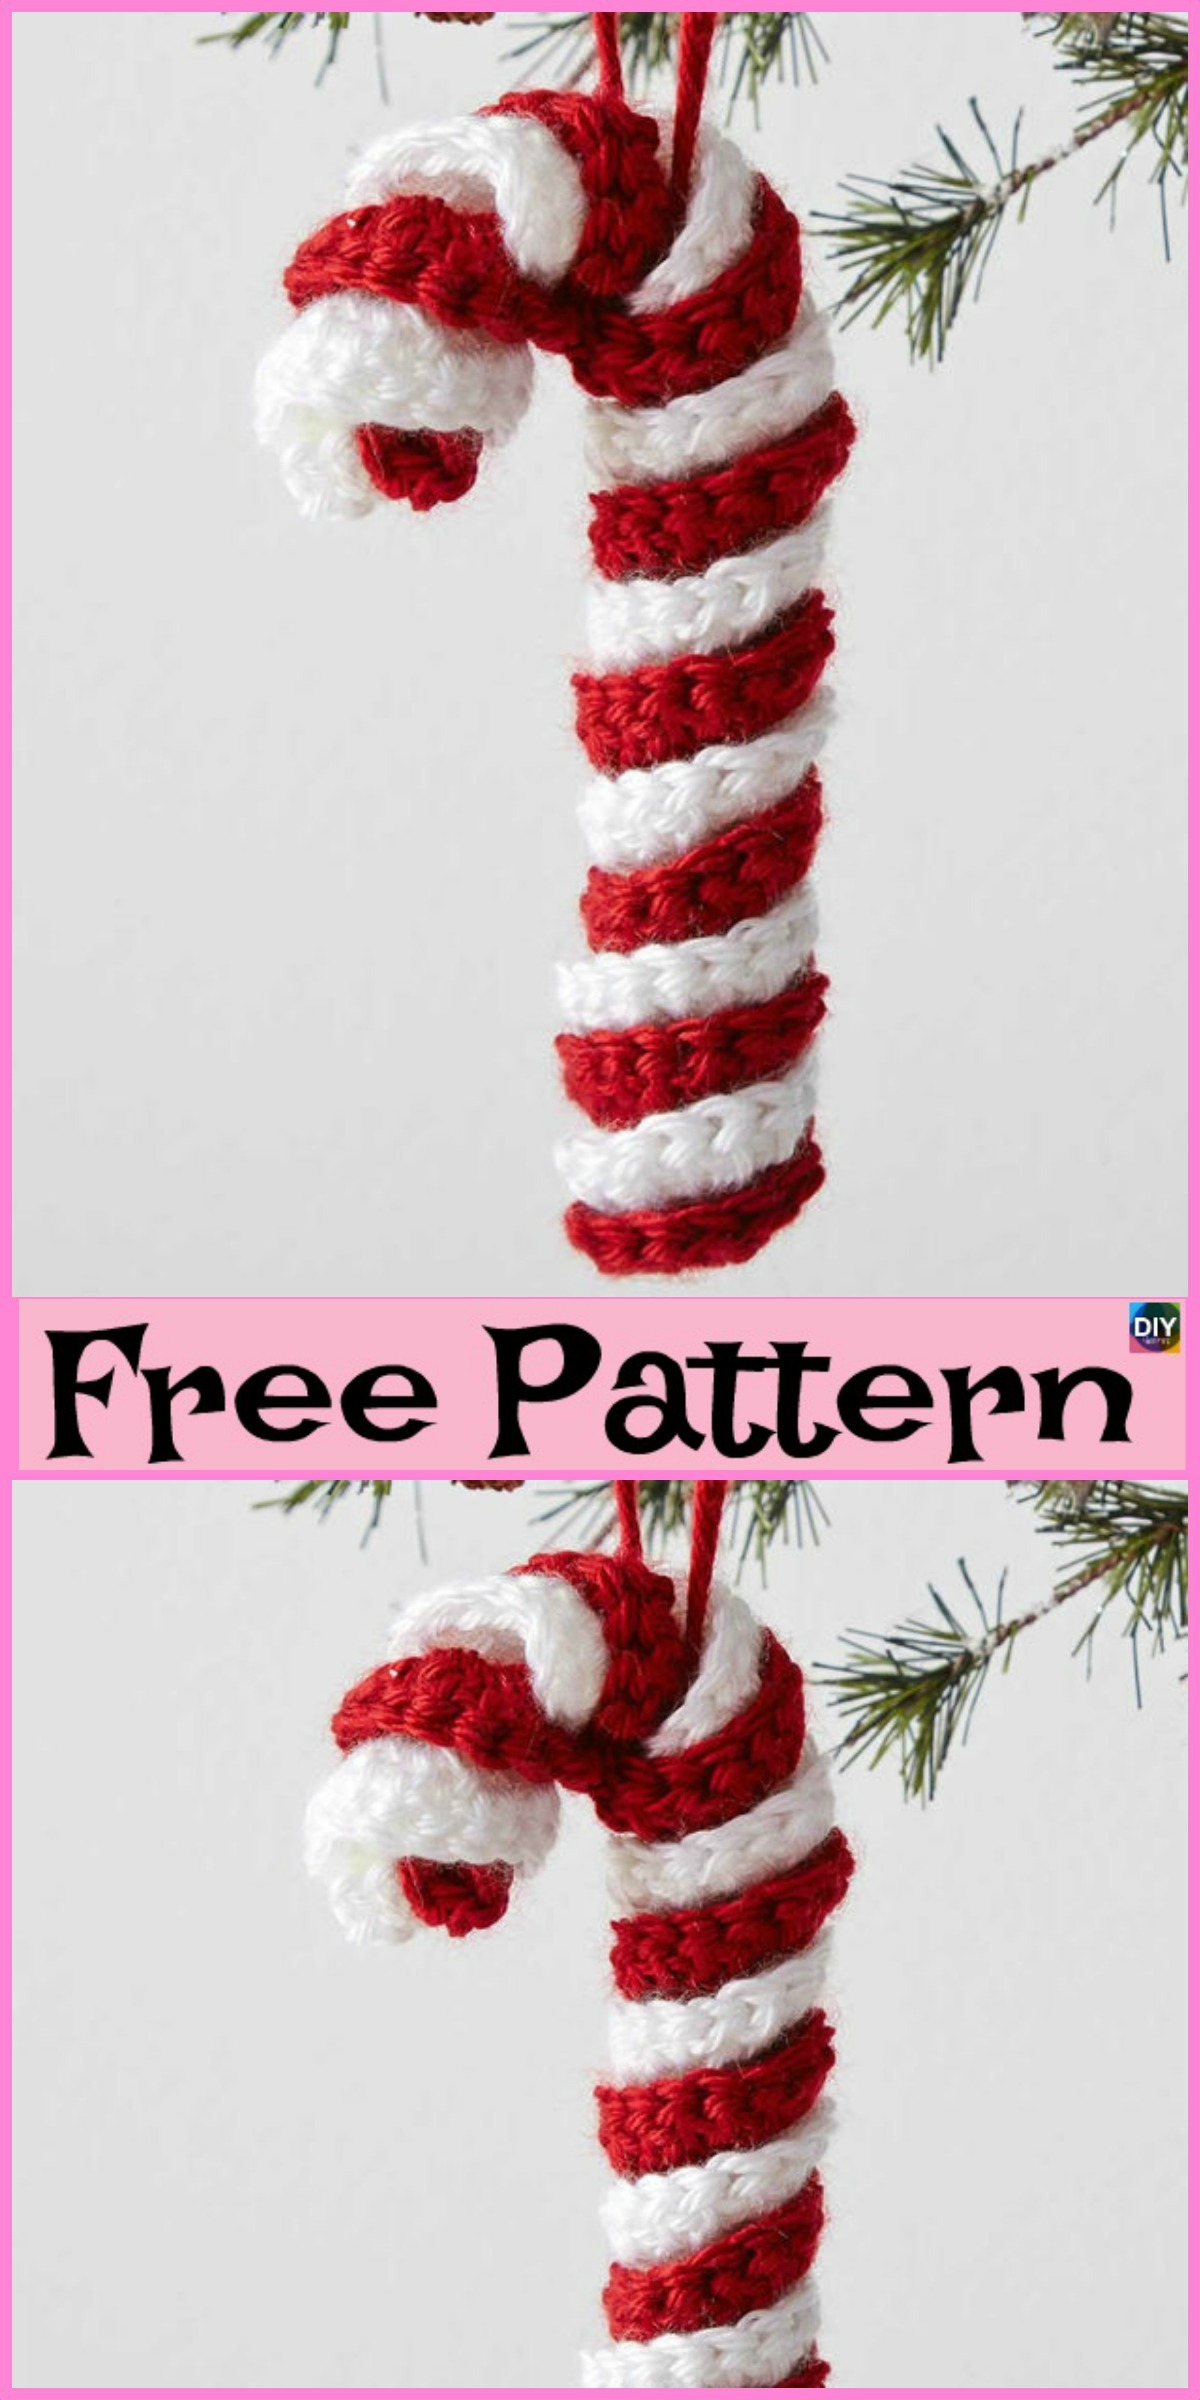 diy4ever-Easy Crochet Candy Canes - Free Pattern 